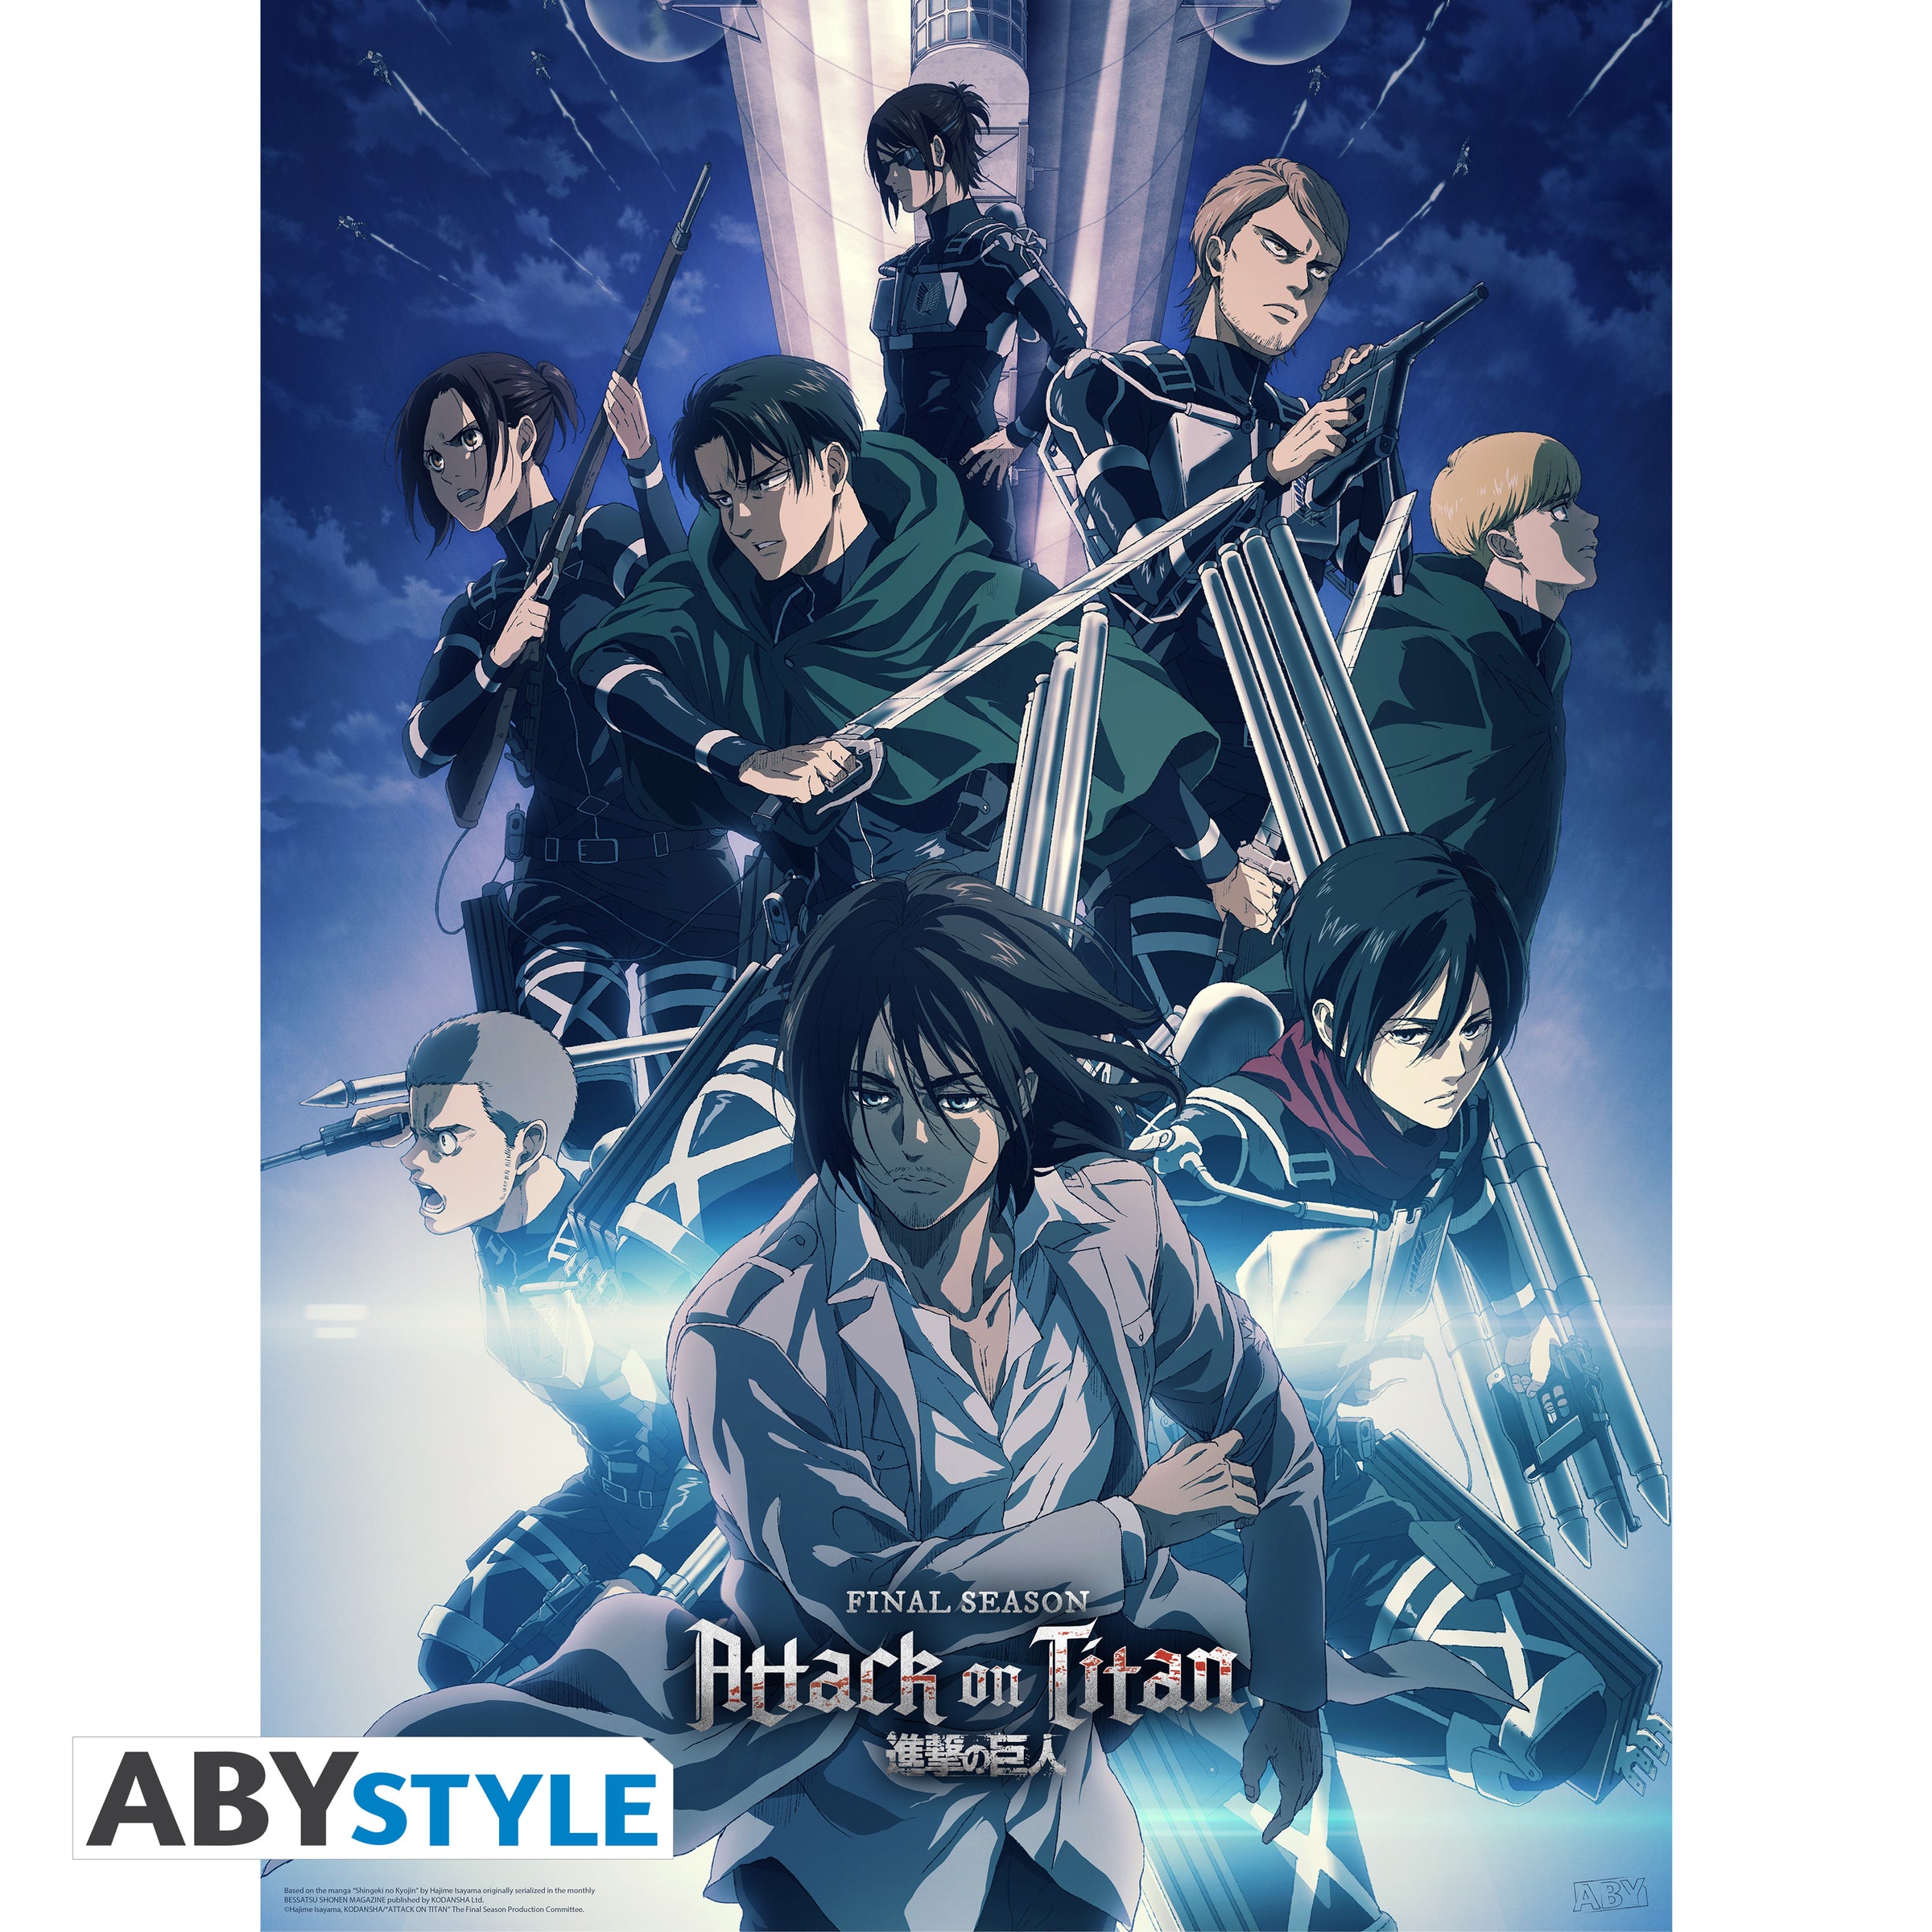 ABYSTYLE Attack on Titan Levi 4 Acryl® Acrylic Stand Model Figure Anime  Manga Desktop Accessories Merch Gift